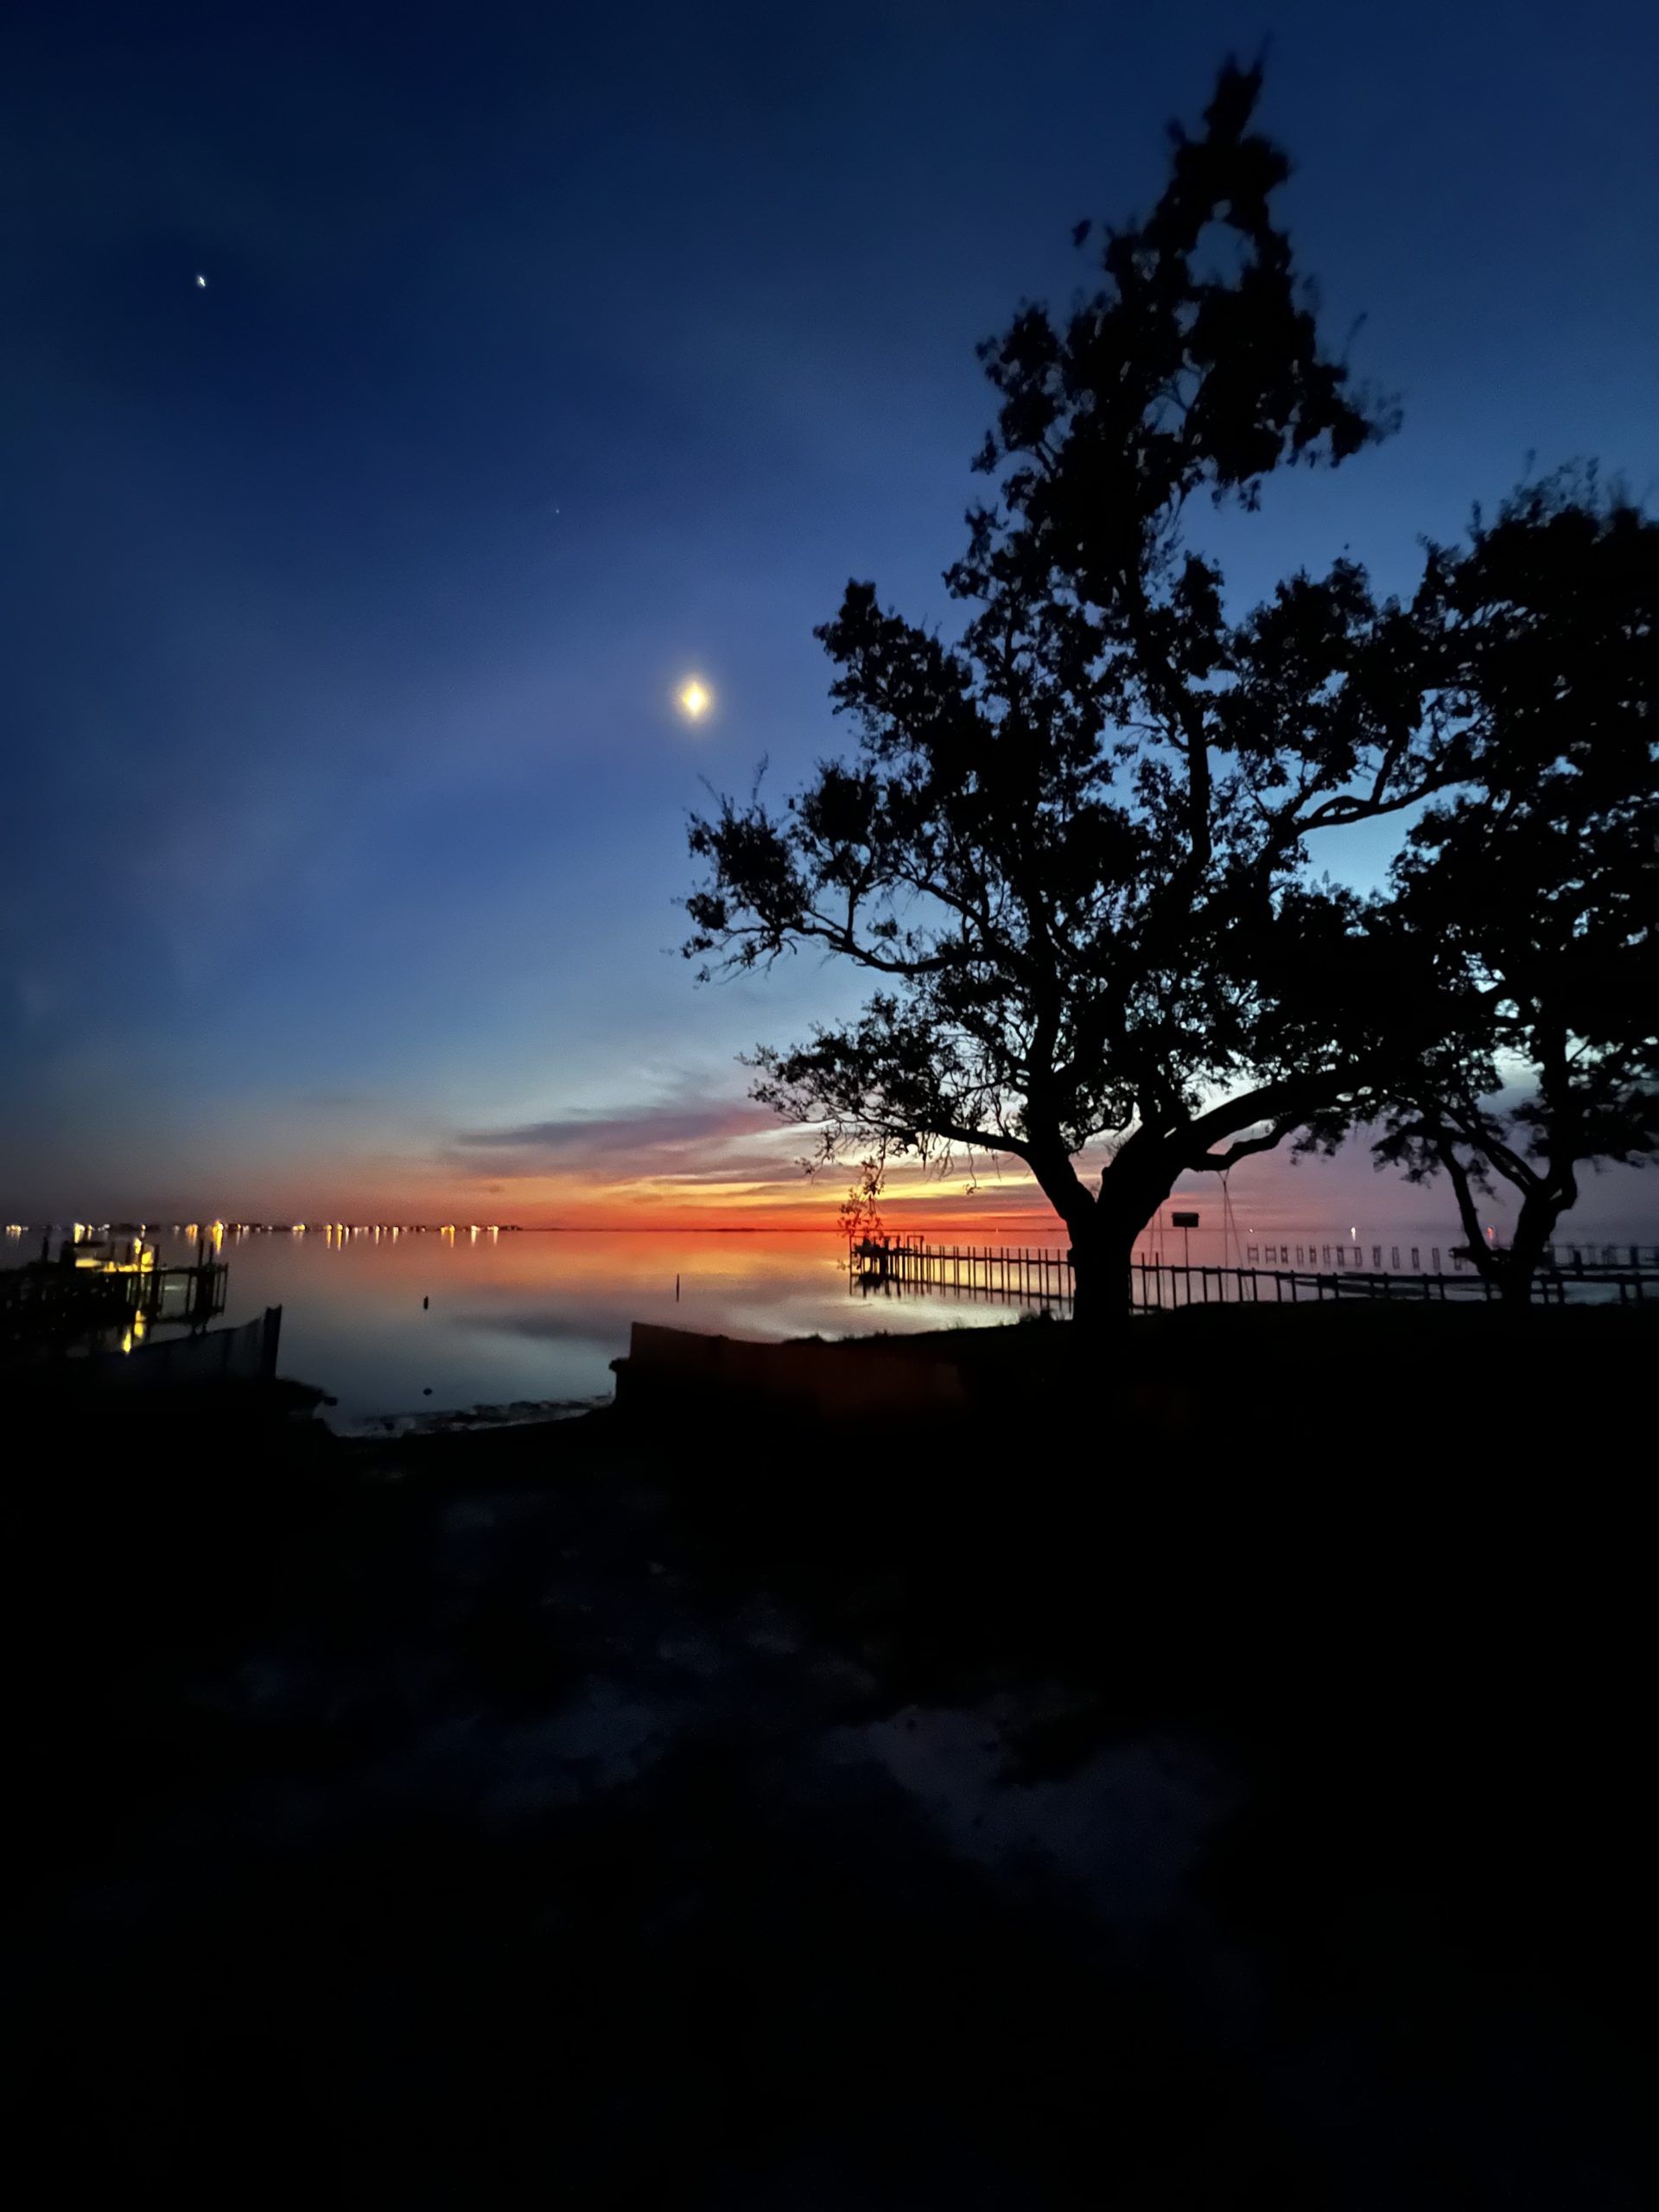 Perhaps we should have called this photo a Photo of the Night instead of Photo of the Day. Taken just after sunset over the Navarre Sound, Kellie Wooten's photo shows the beauty of Navarre as night approaches.